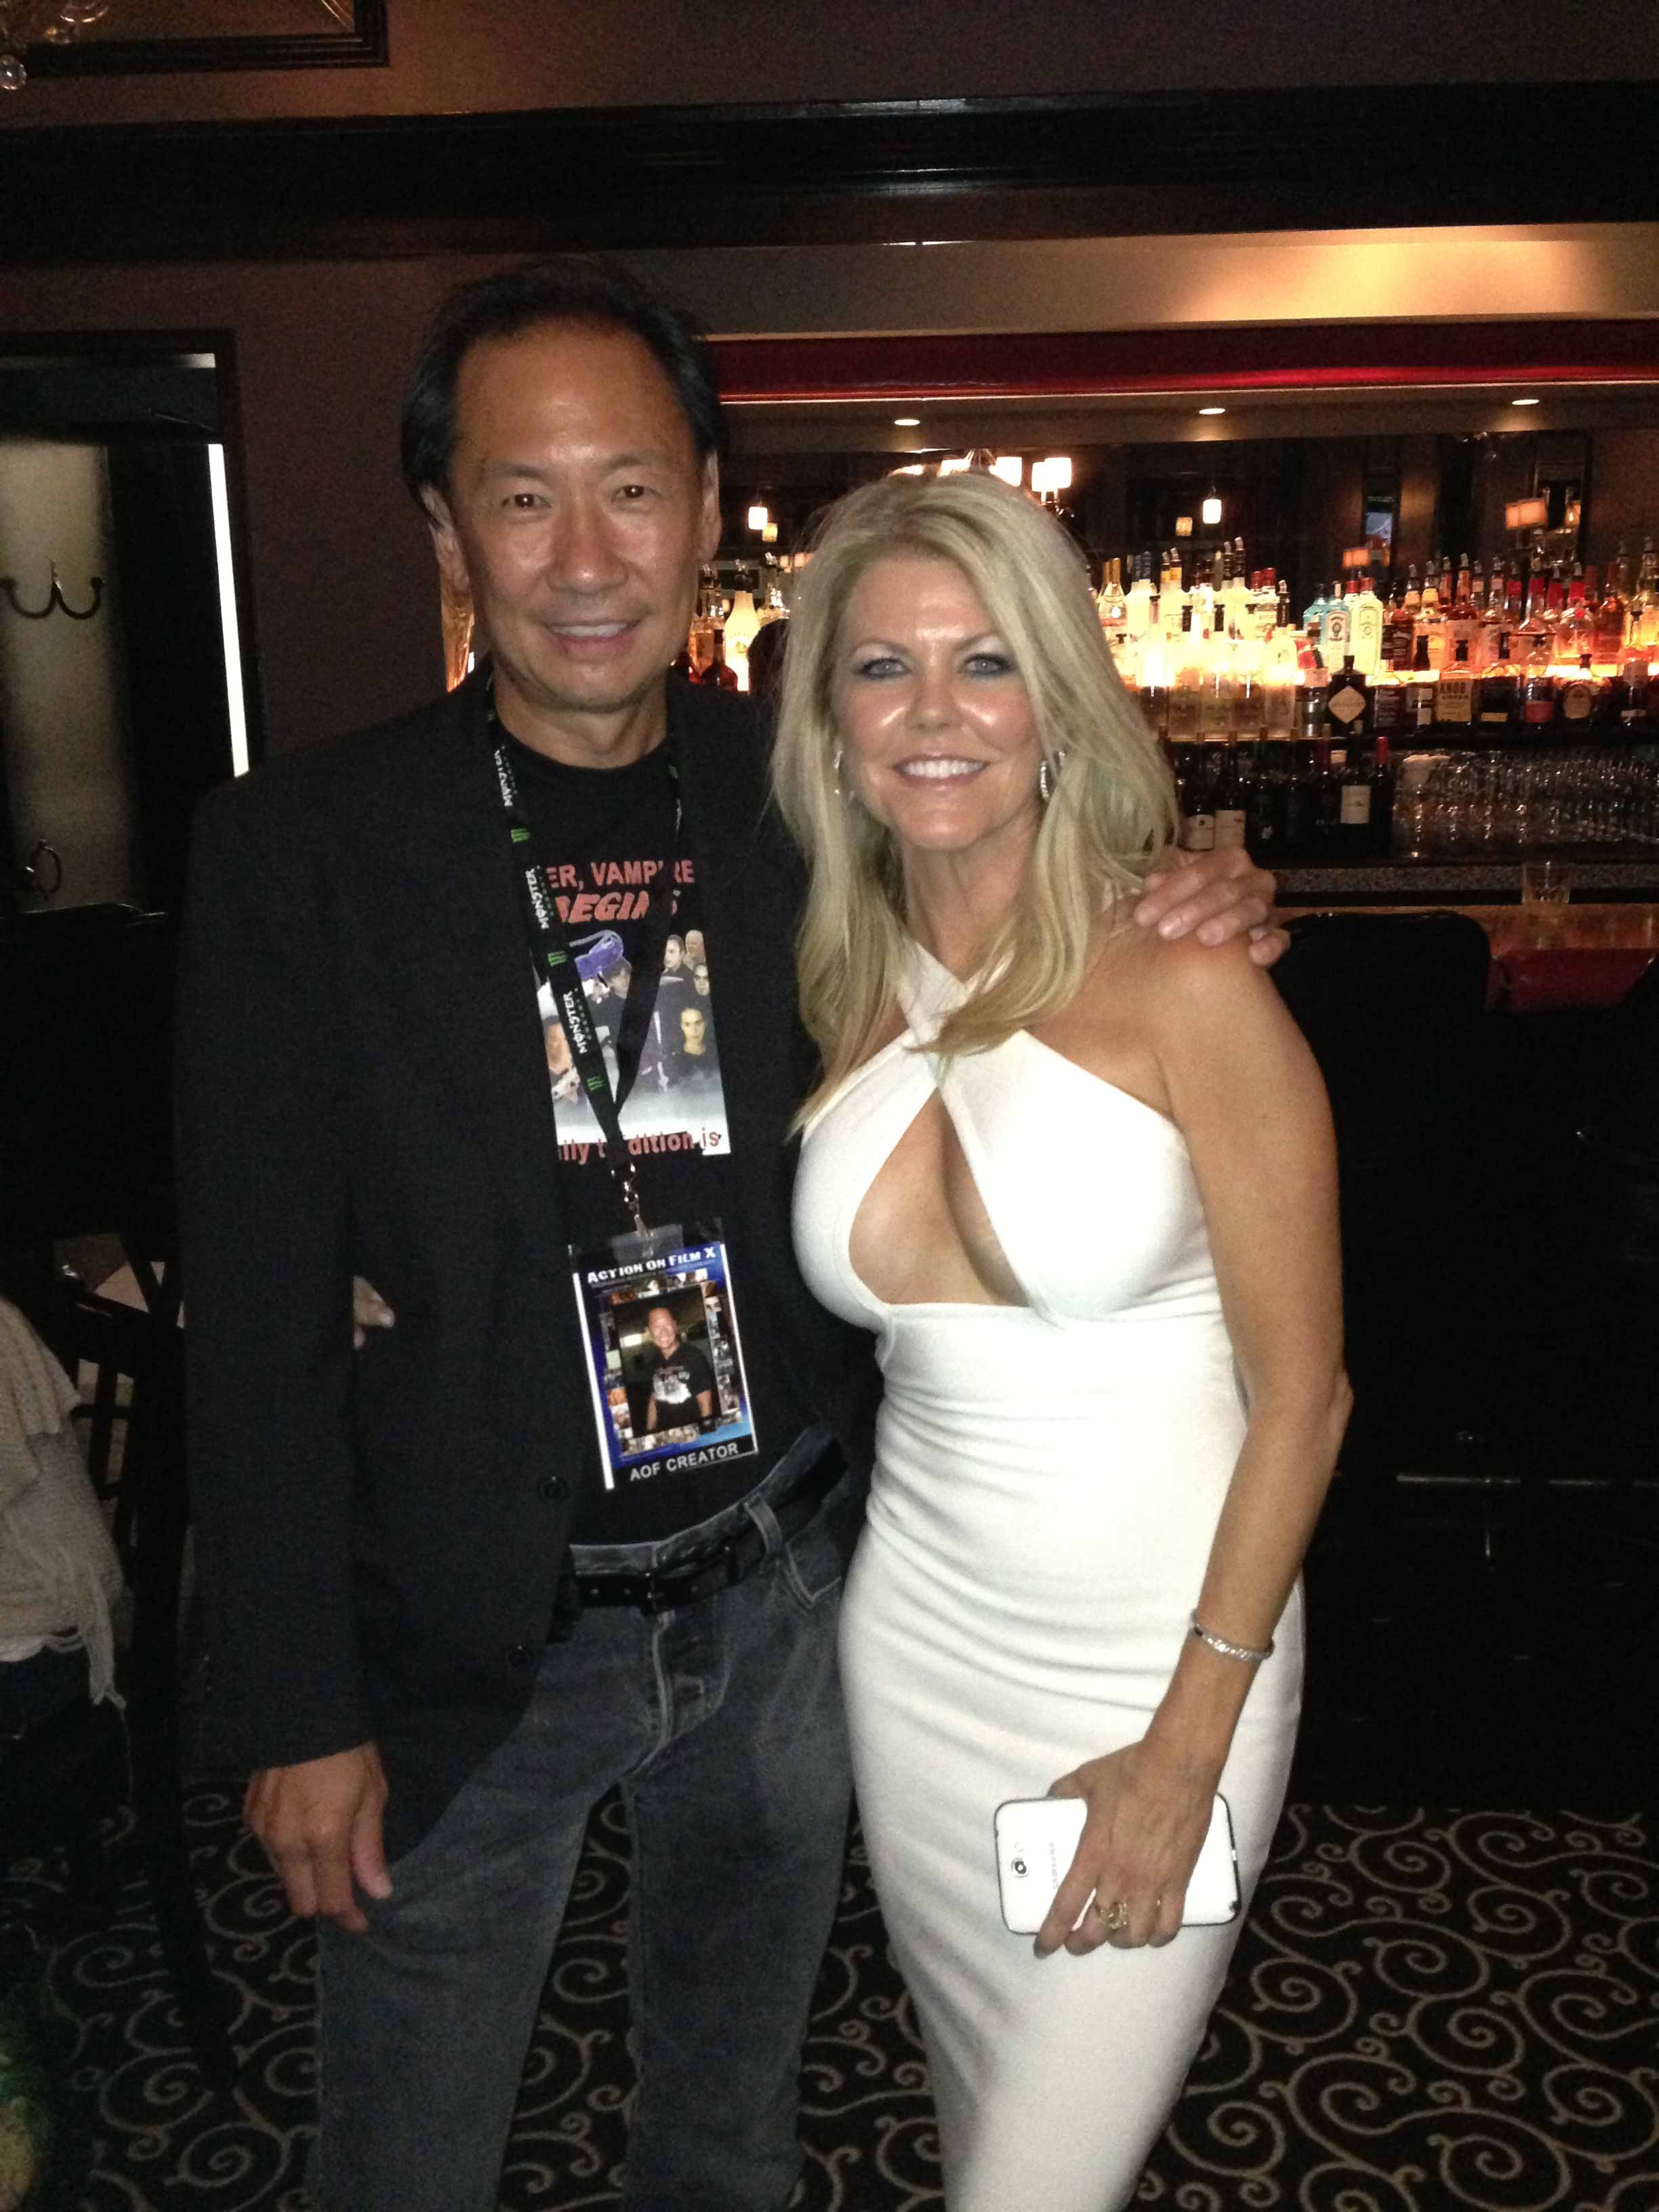 Best Guerrilla Film Short Nominee at the Action on Film Festival: Gary Vinant-Tang and Tracey Birdsall from Dawn of the Crescent Moon.